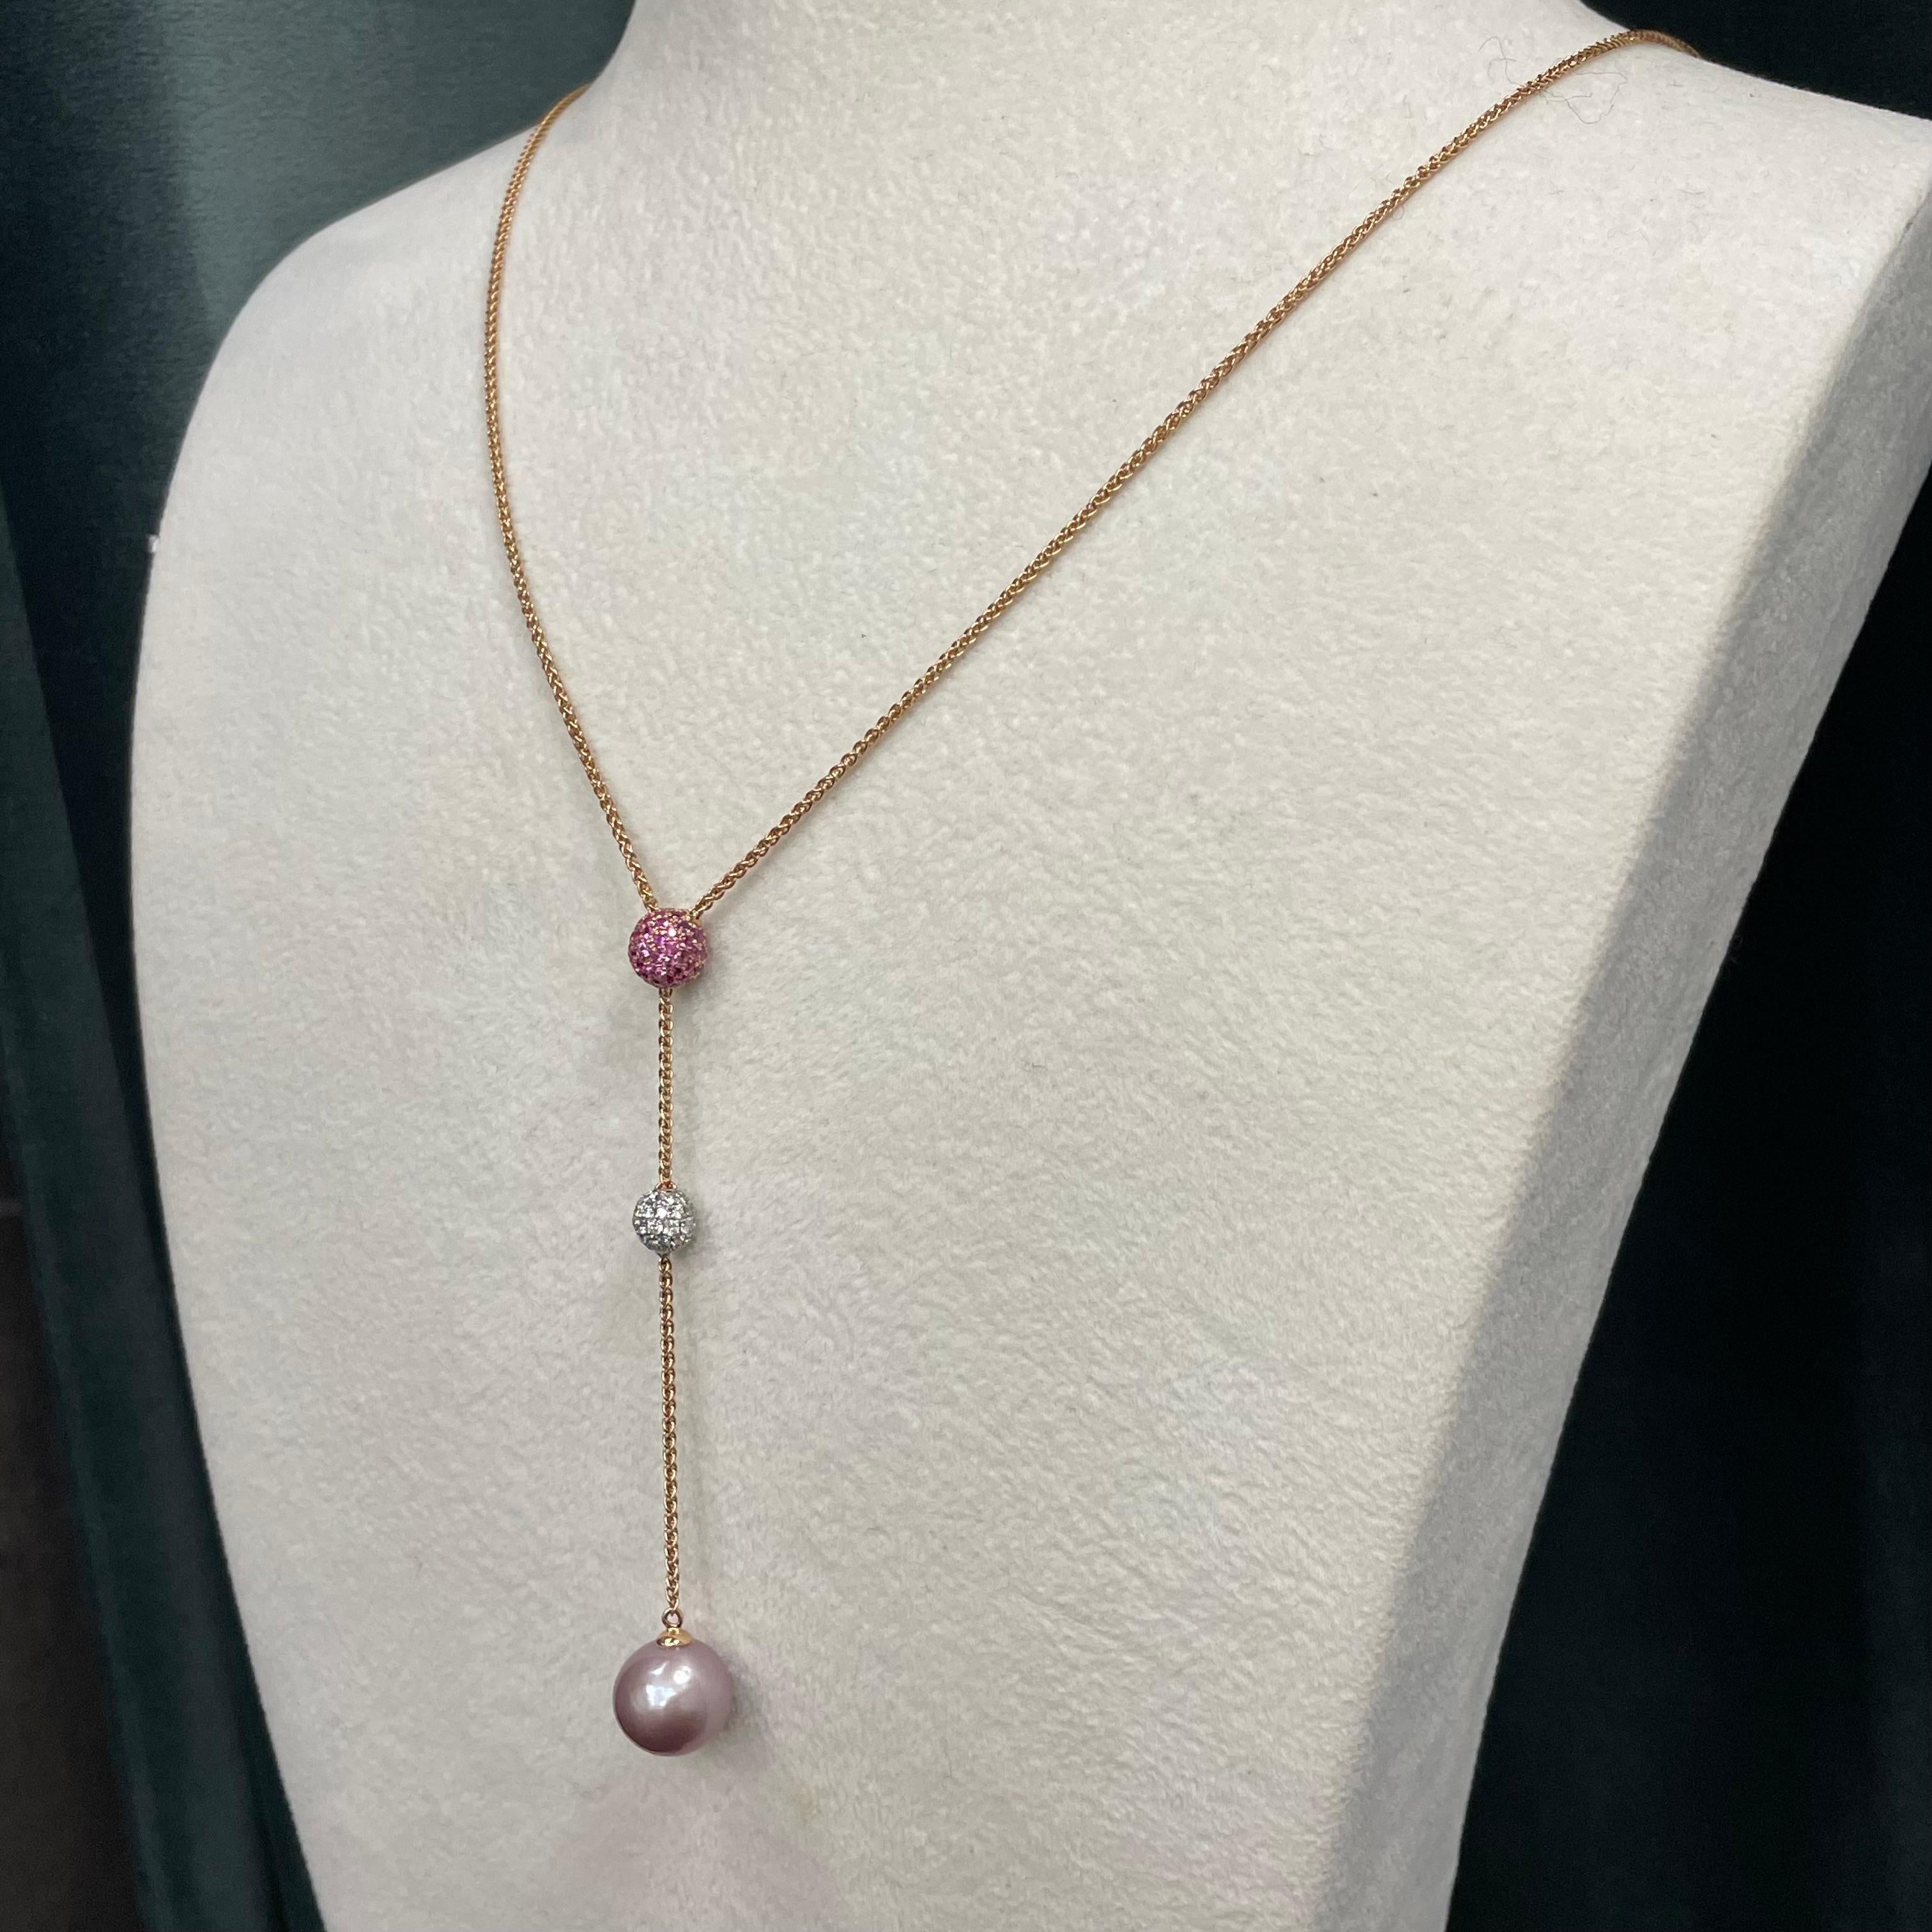 A lustrous freshwater purple pearl with pink sapphire and diamond ball dangles elegantly from a center station in this exceptional women 's necklace. The length of the chain that goes around the neck not including the dangle section is shown at 25.4